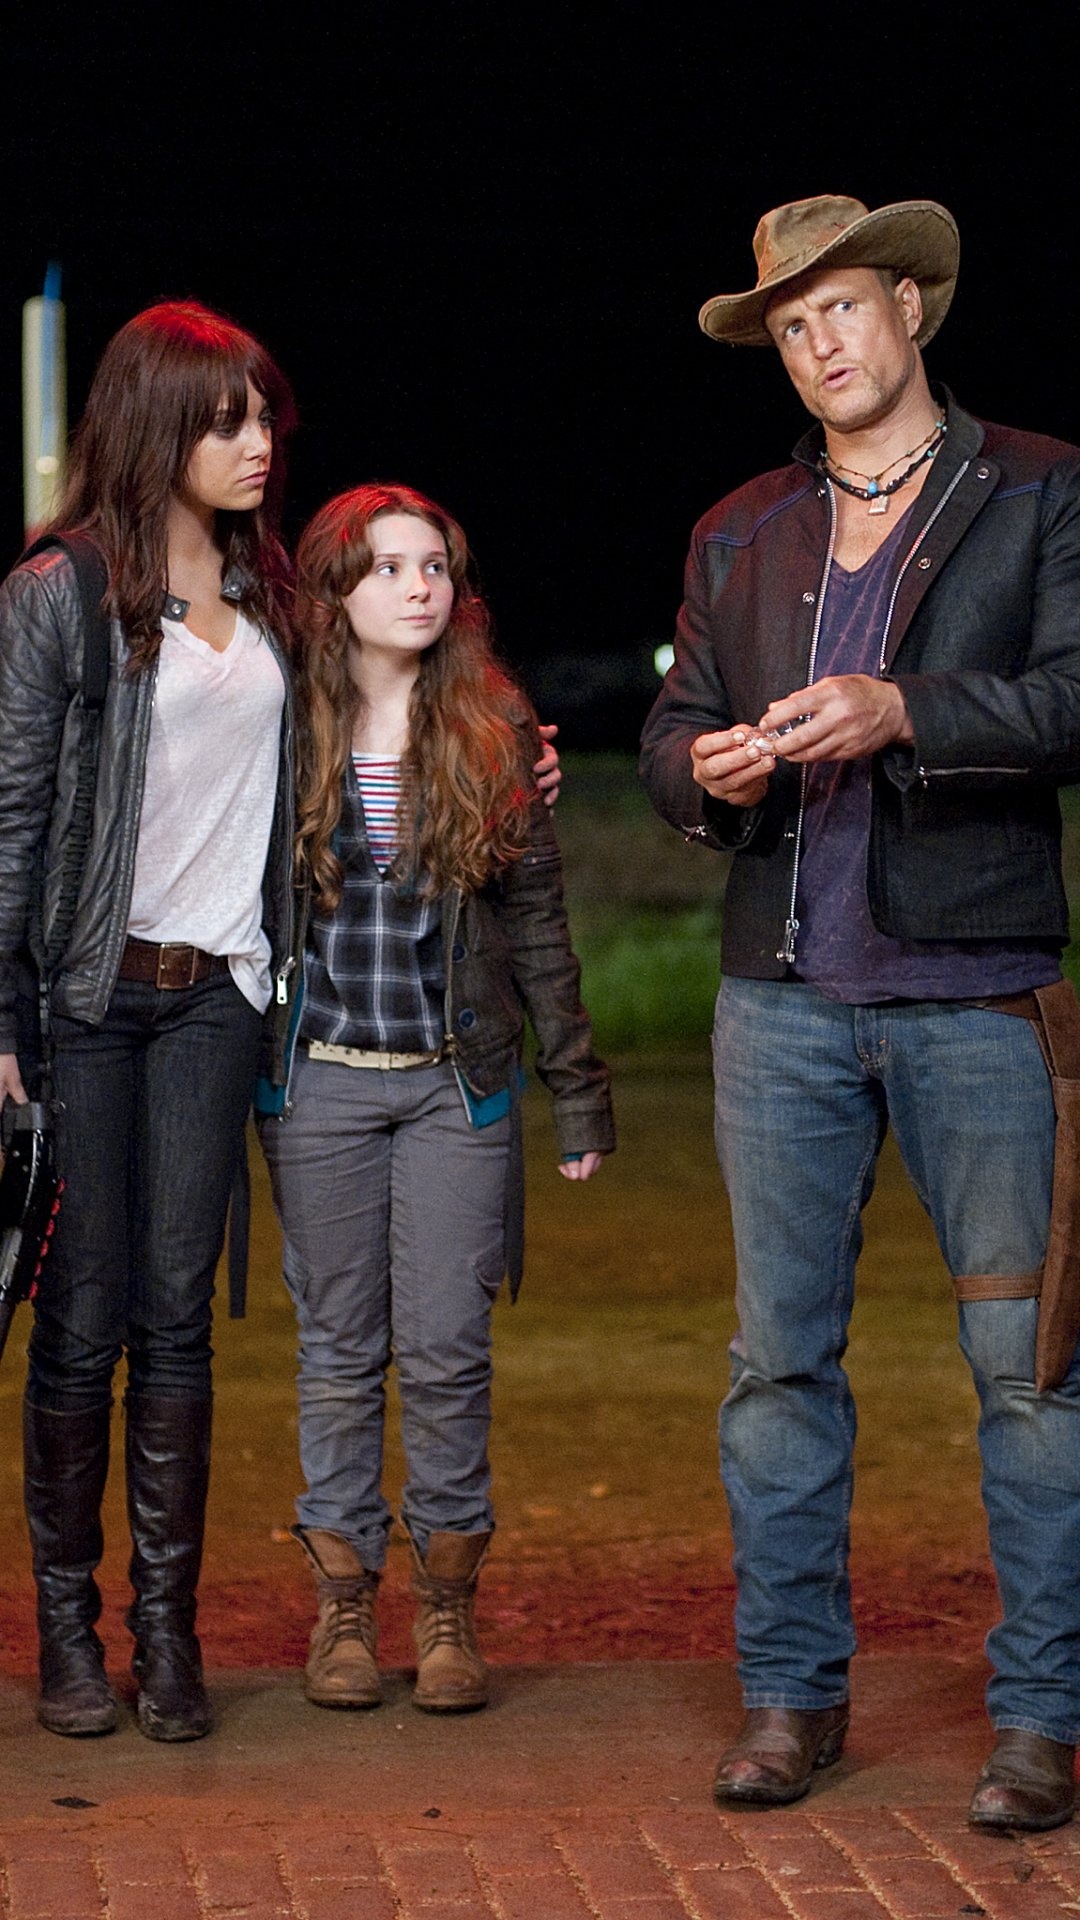 Zombieland: The screenplay for this film was featured in the 2007 Blacklist. 1080x1920 Full HD Background.